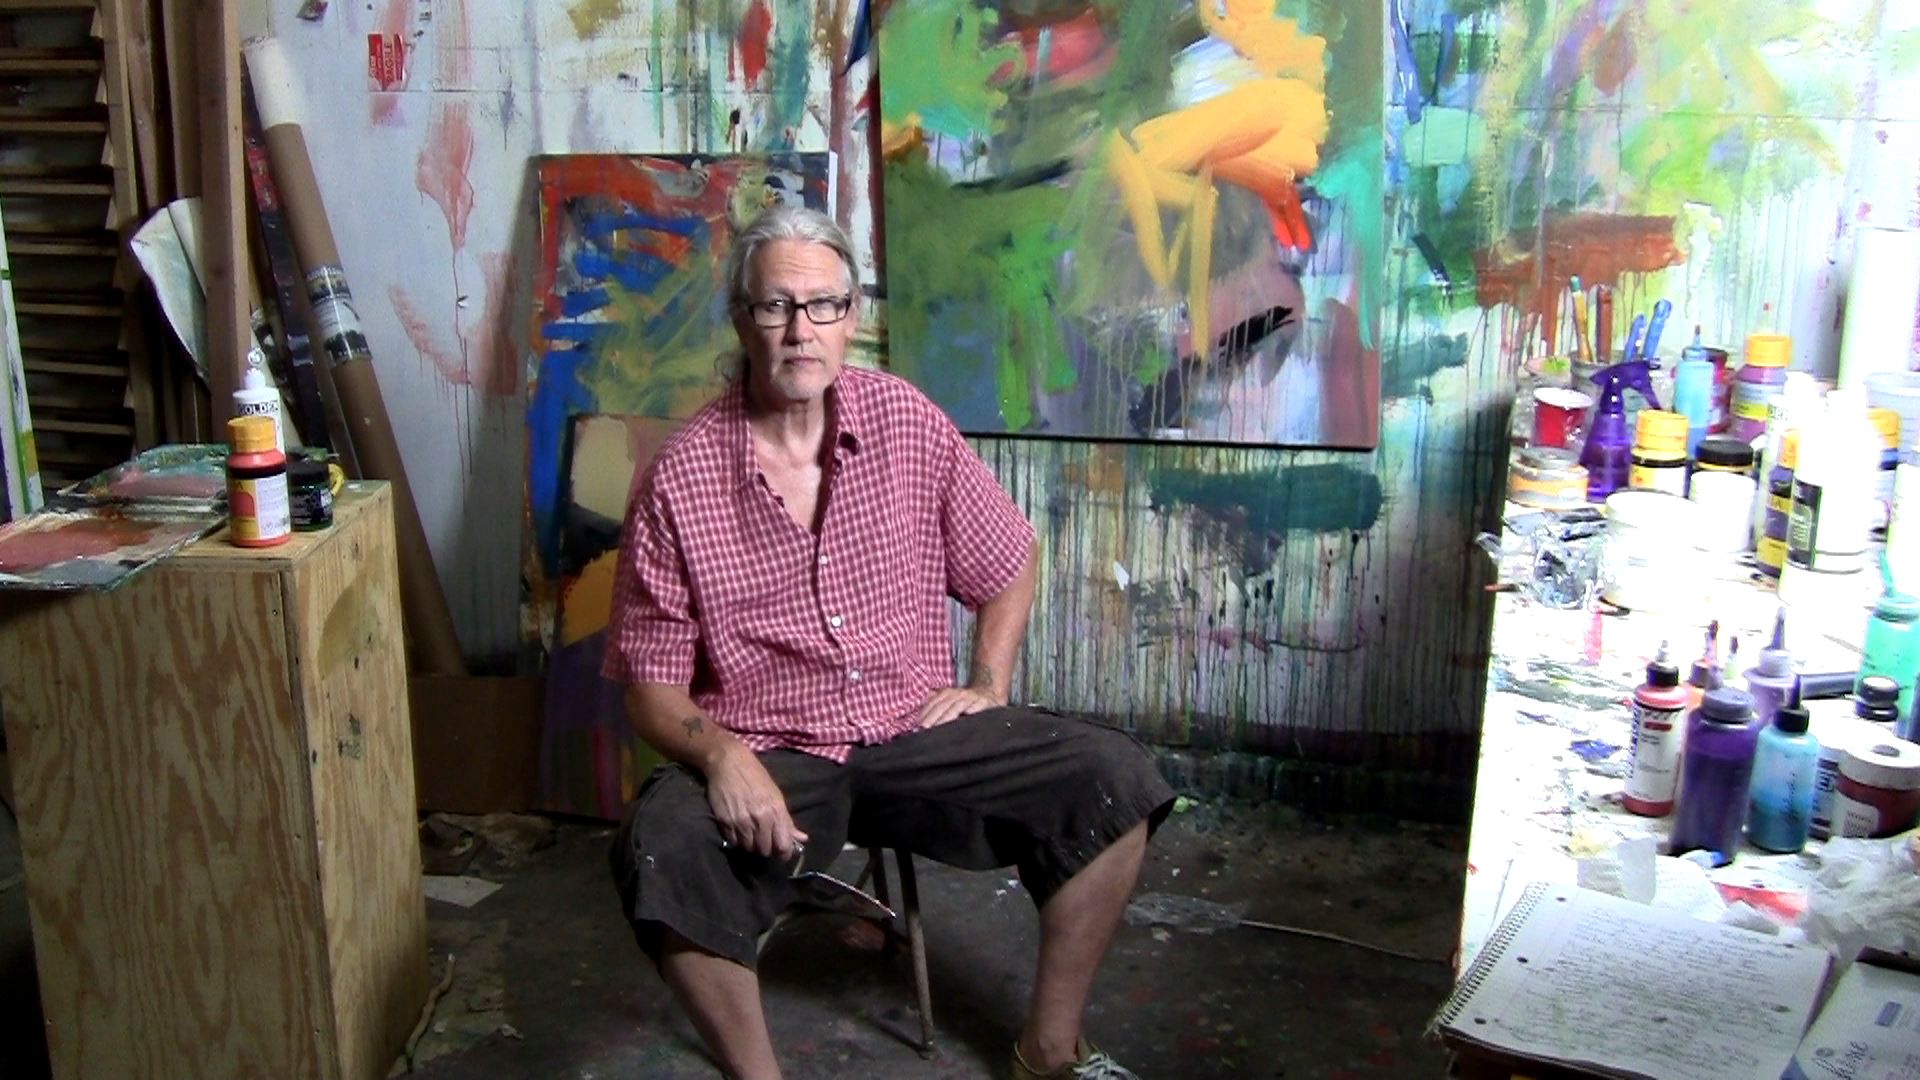 famous artist andy morris in his sudio sitting relaxing between brush strokes large half finished abstract painting behind him